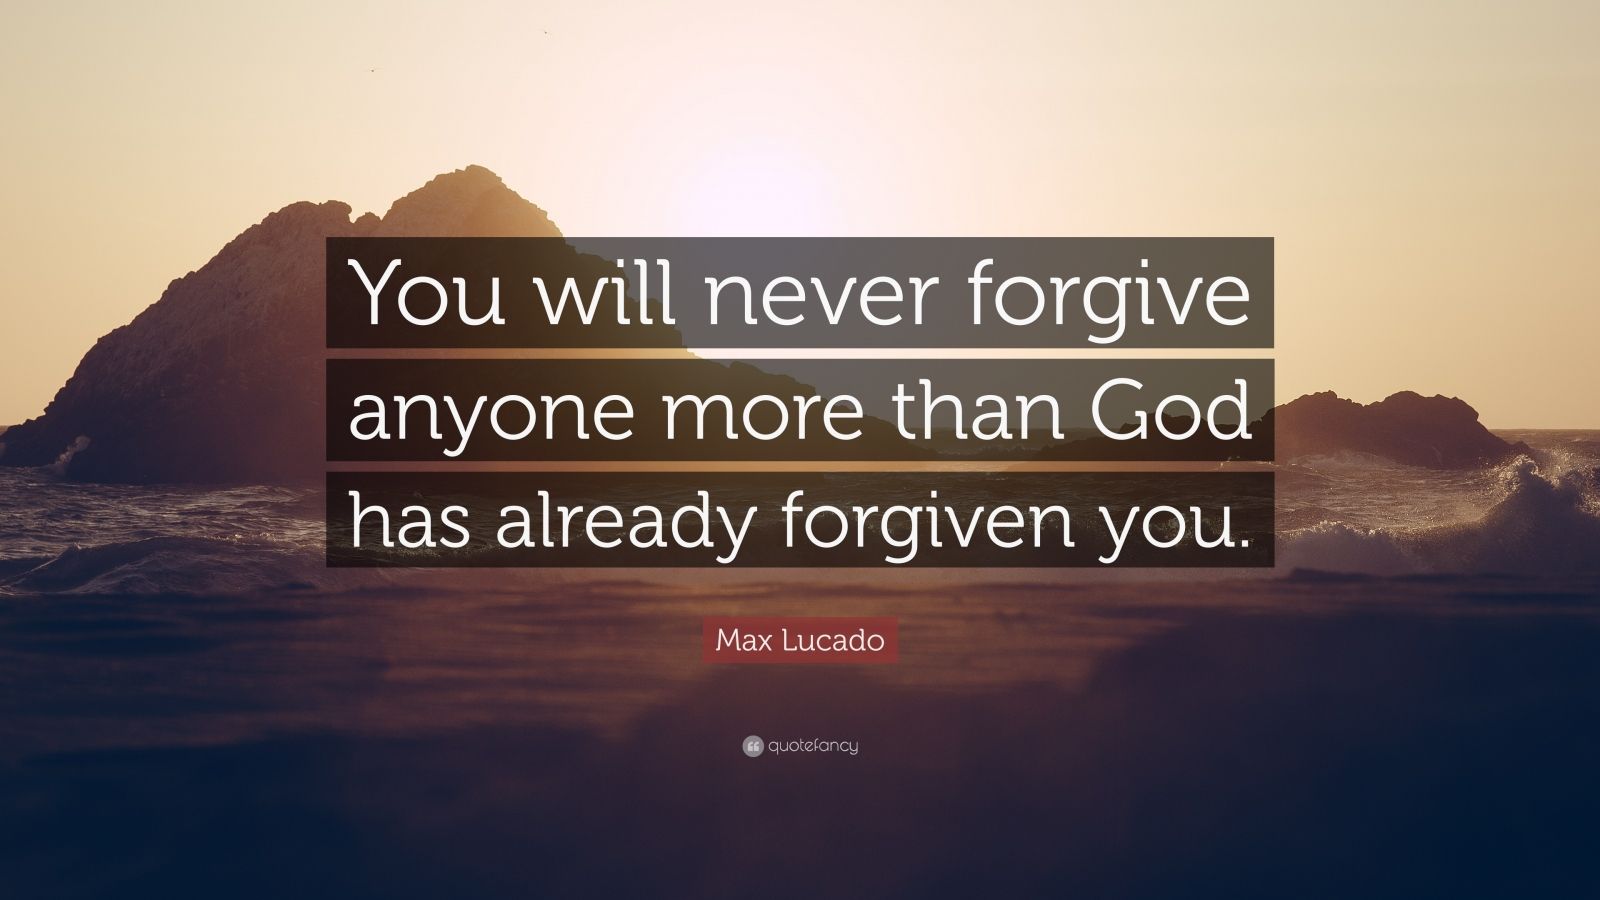 Max Lucado Quote: “You will never forgive anyone more than God has ...